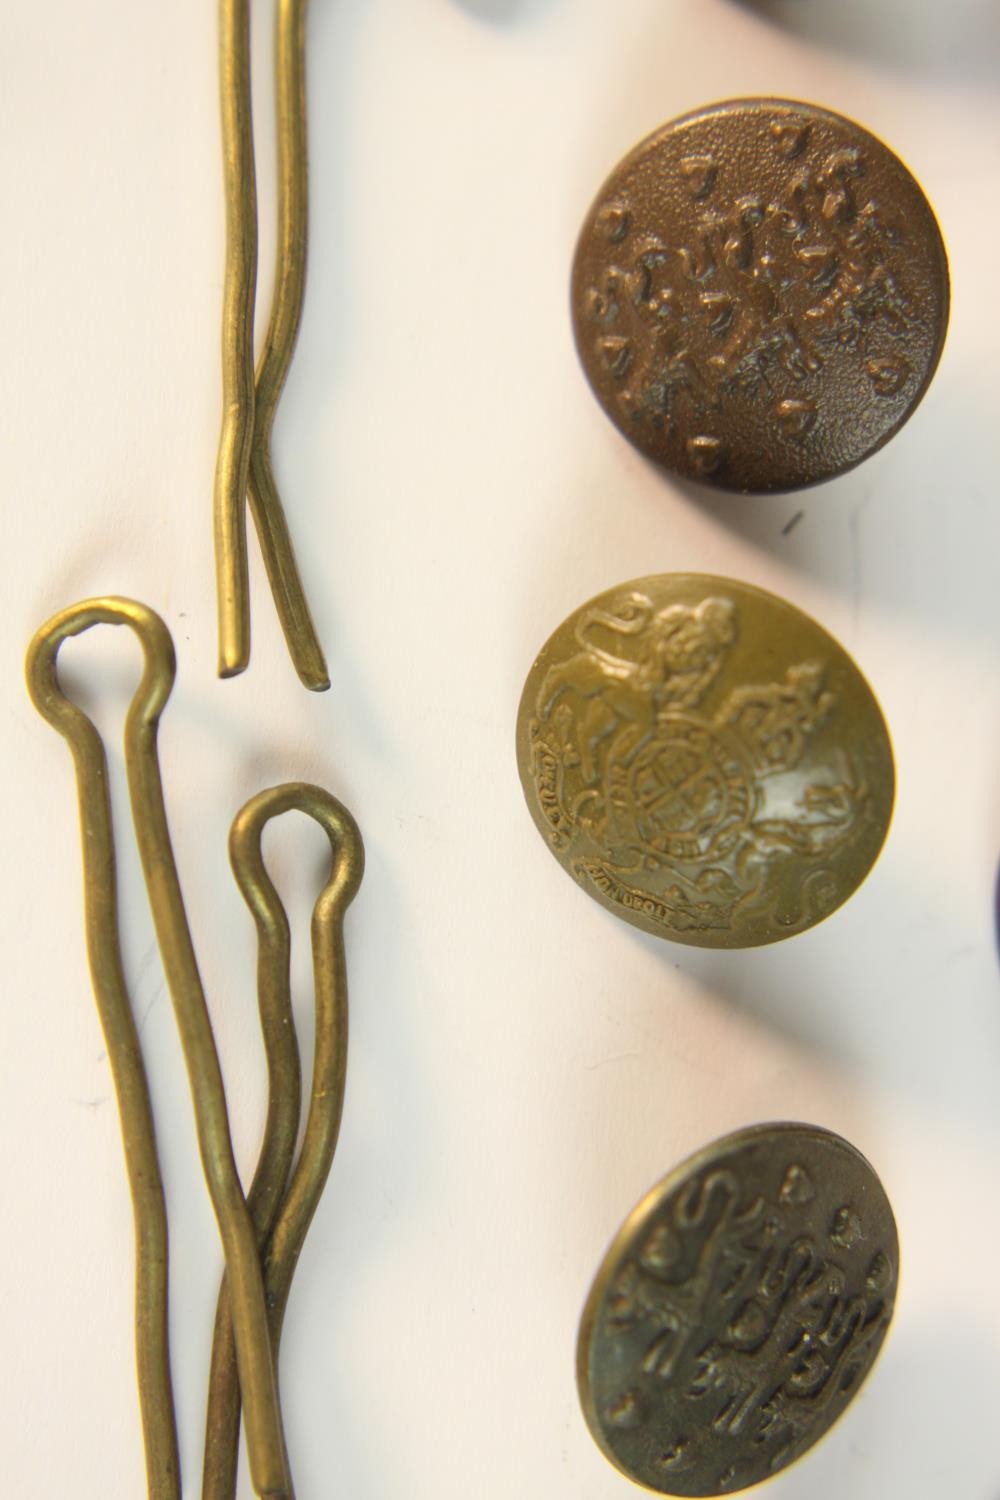 A collection of Danish military badges and uniform buttons, various designs. - Image 8 of 8